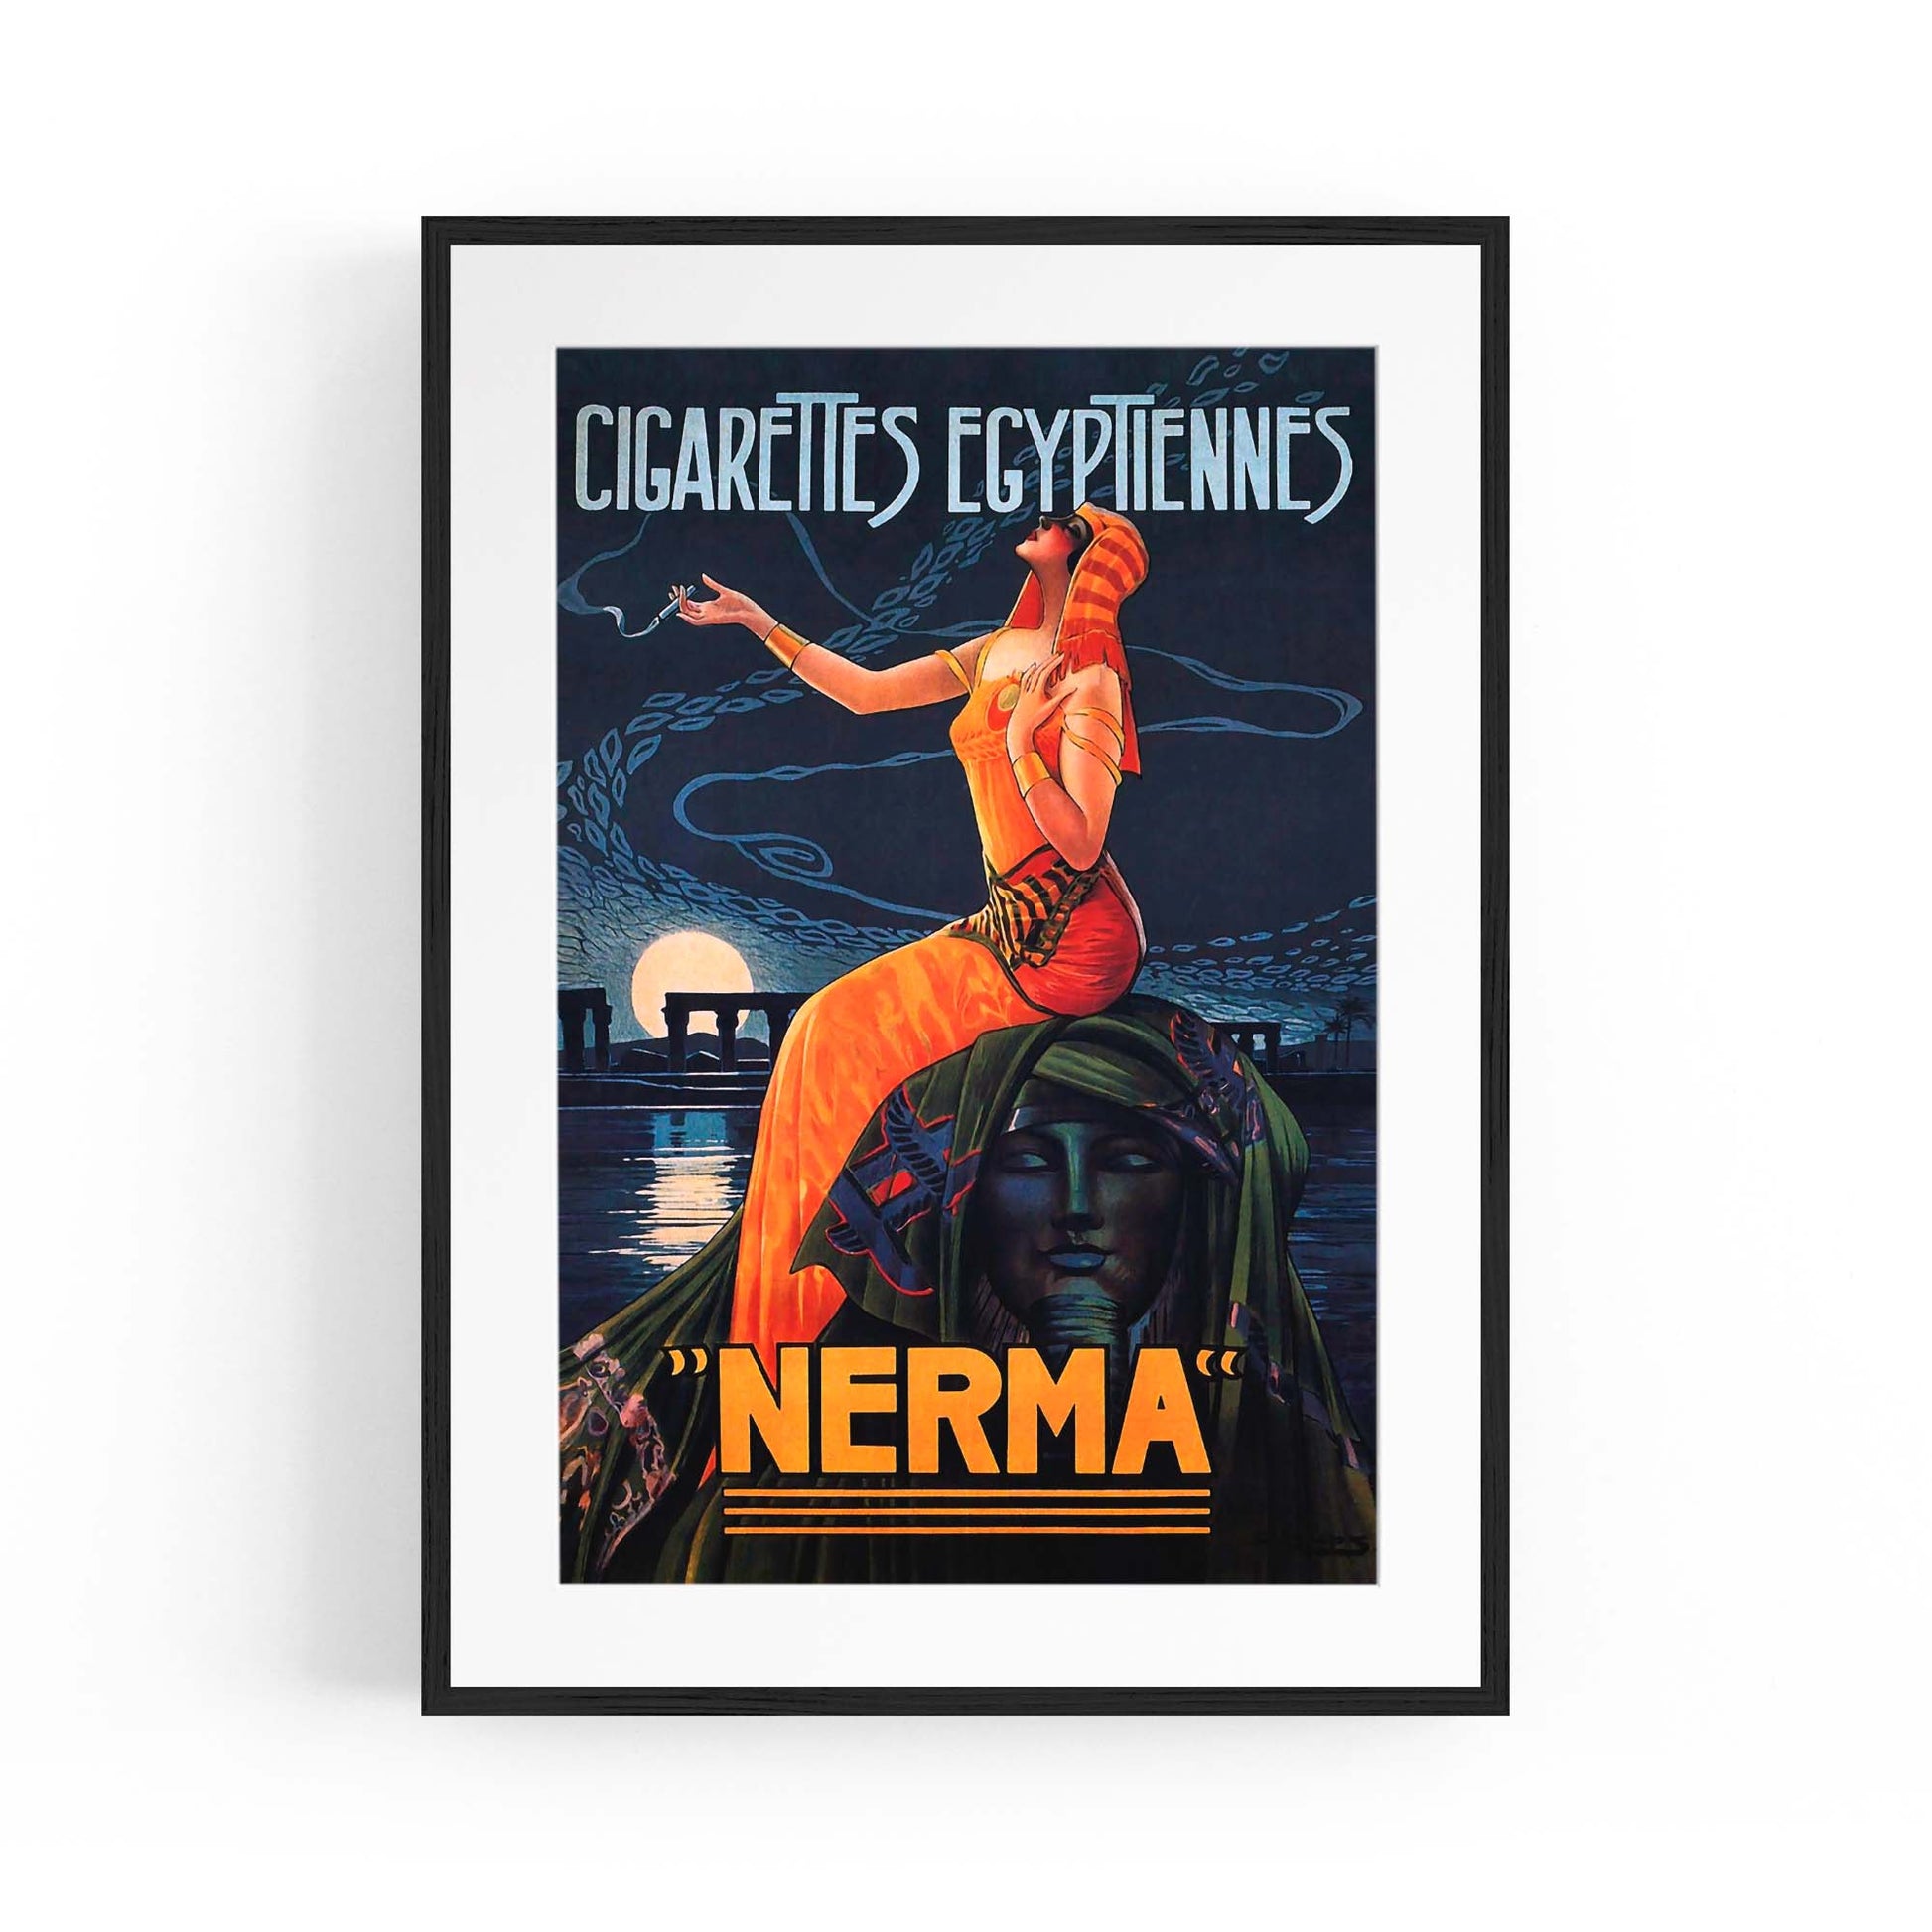 French Cigarette Vintage Advert Wall Art - The Affordable Art Company